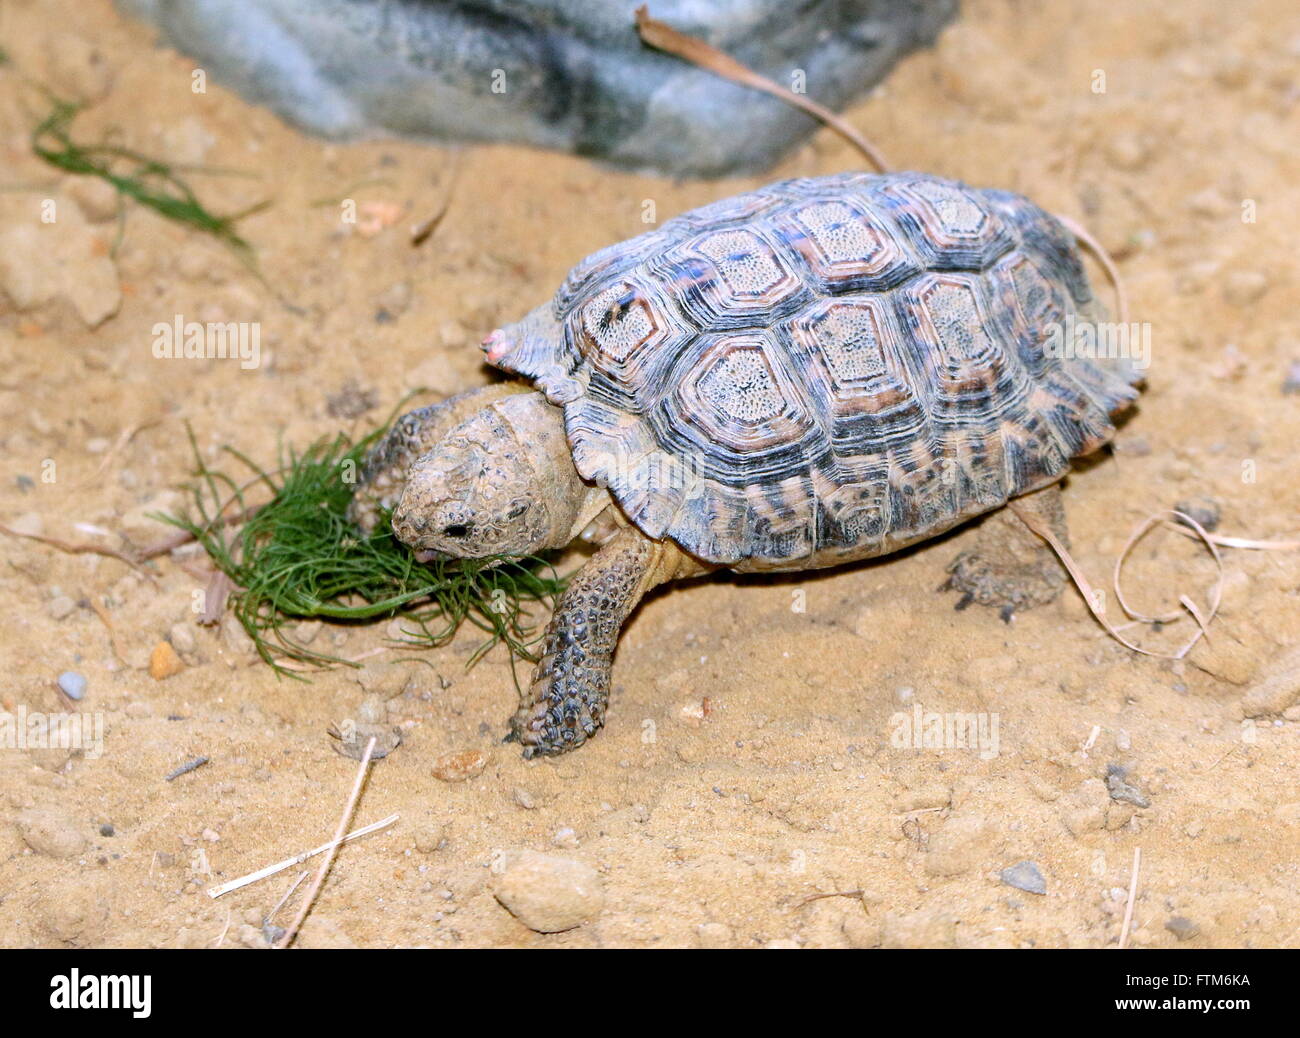 South African Speckled Cape Tortoise or Speckled Padloper (Homopus Signatus) eating grass. Smallest tortoise in the world Stock Photo